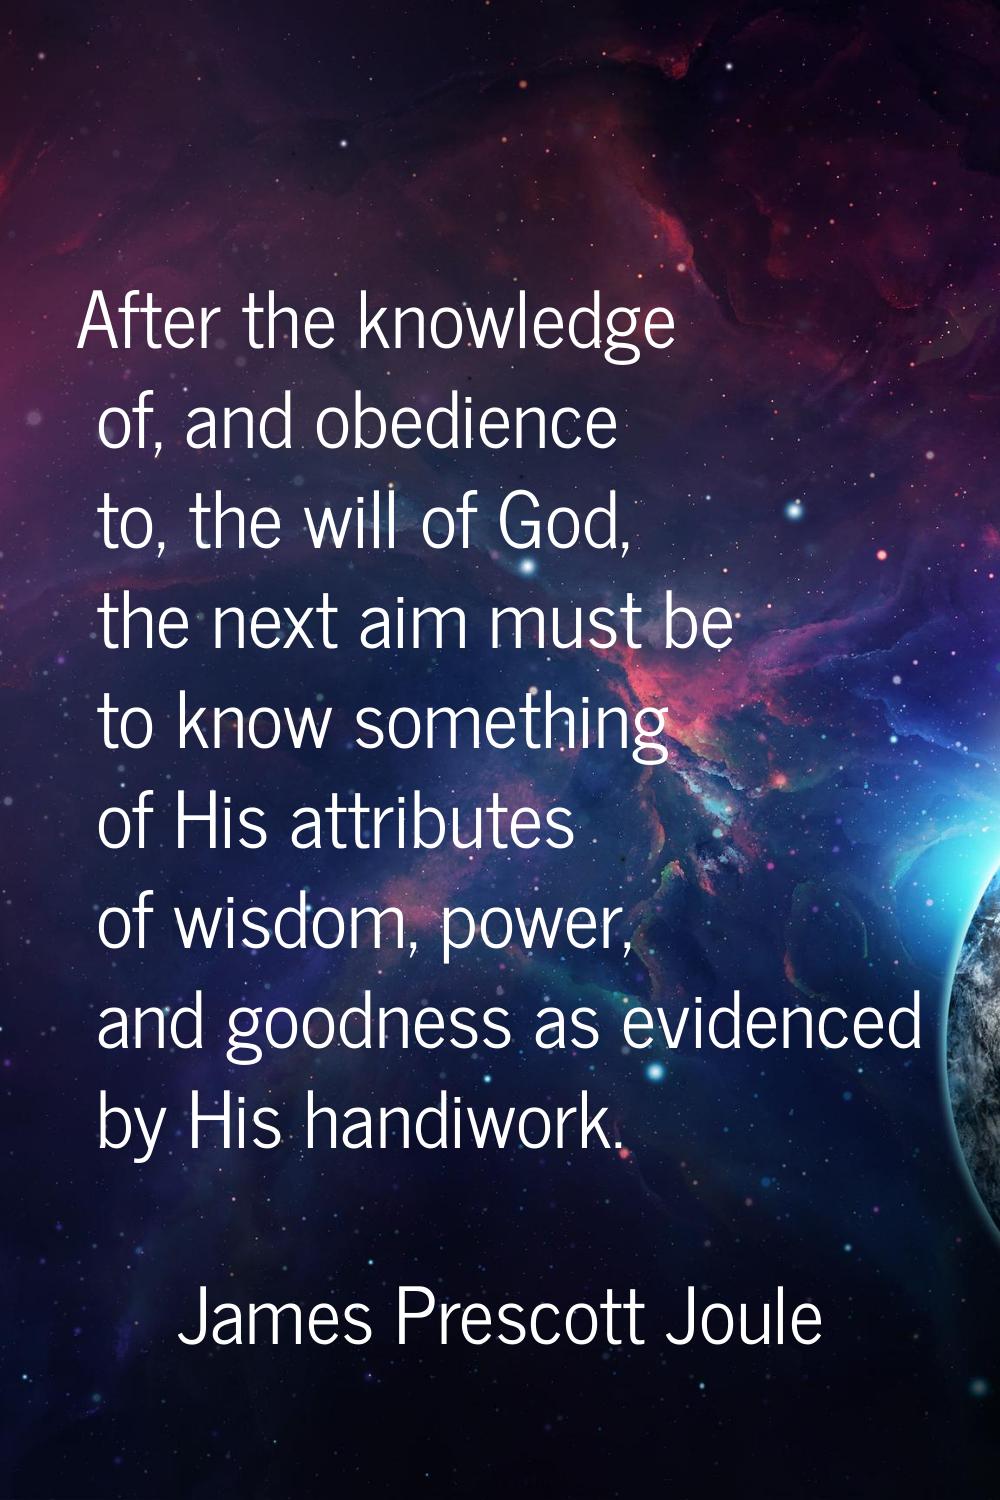 After the knowledge of, and obedience to, the will of God, the next aim must be to know something o